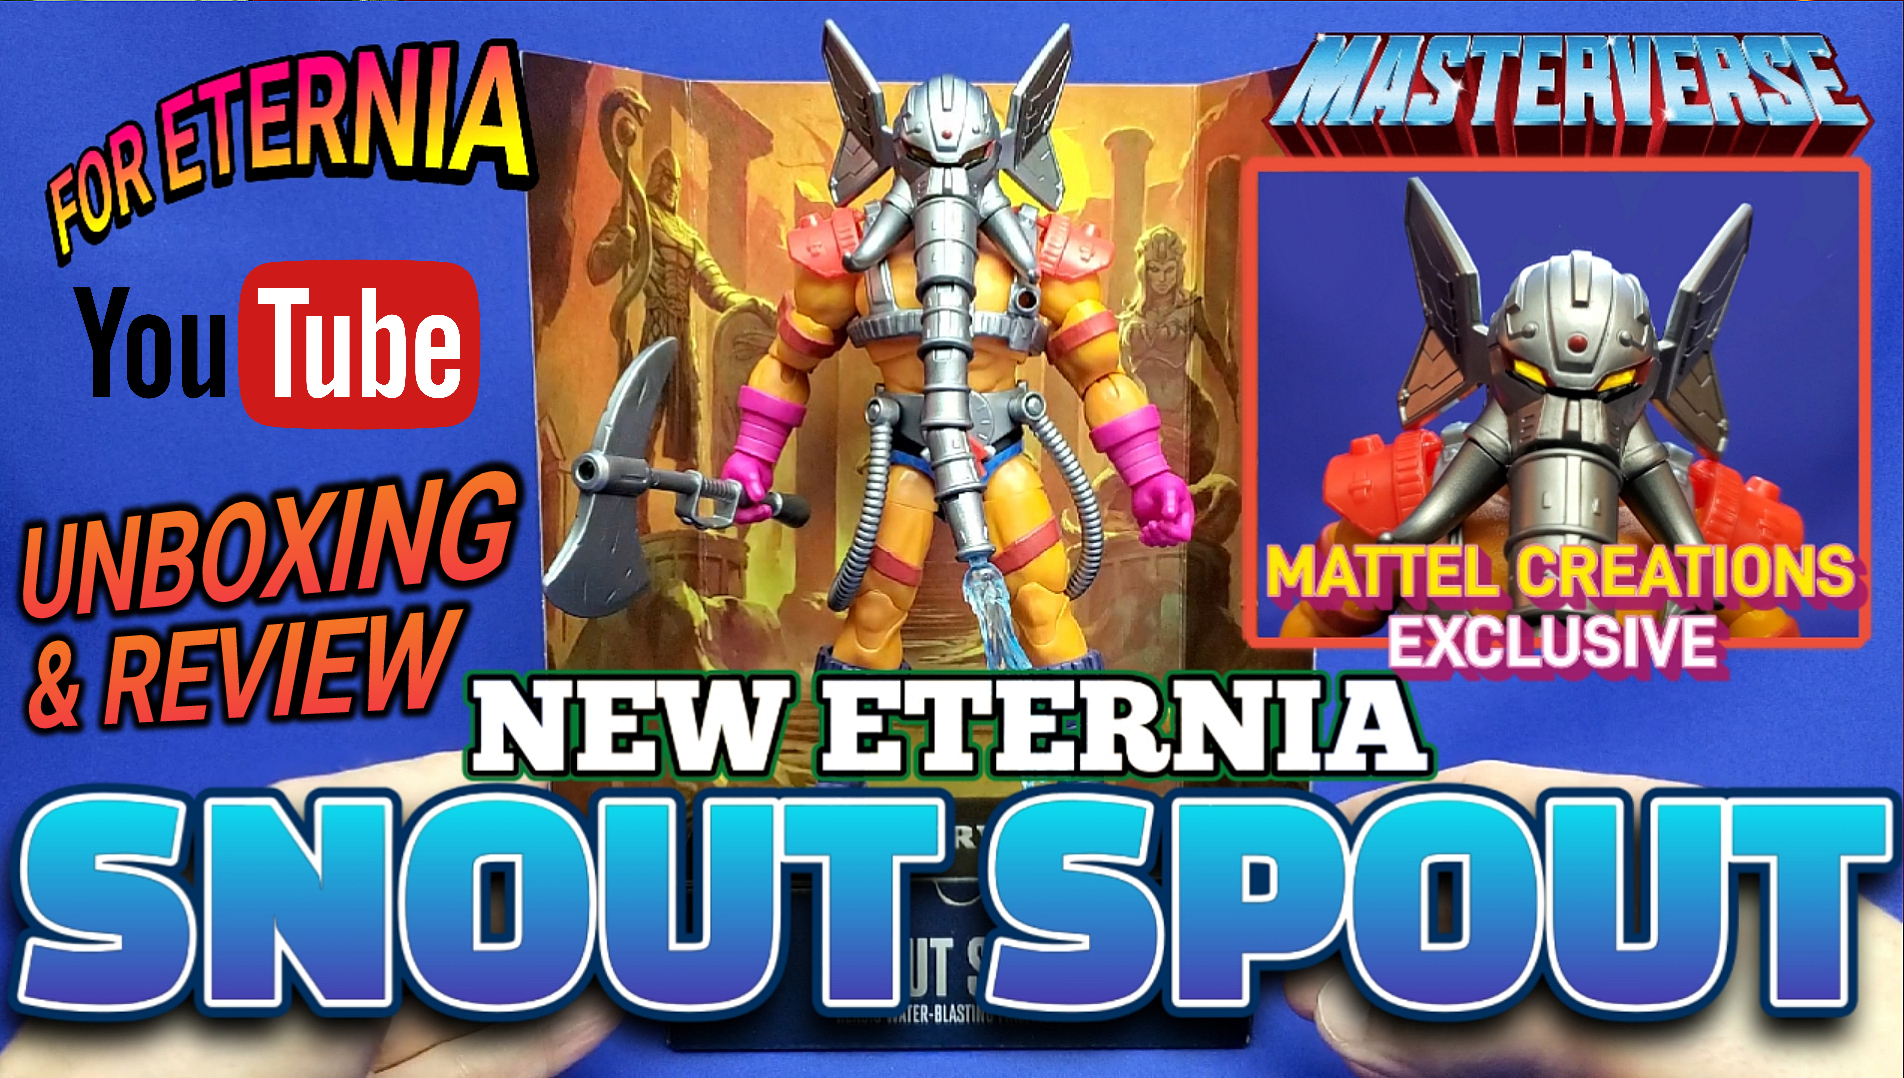 UNBOXING & REVIEW Masterverse SNOUT SPOUT Masters of the Universe ”New Eternia” Action Figure!